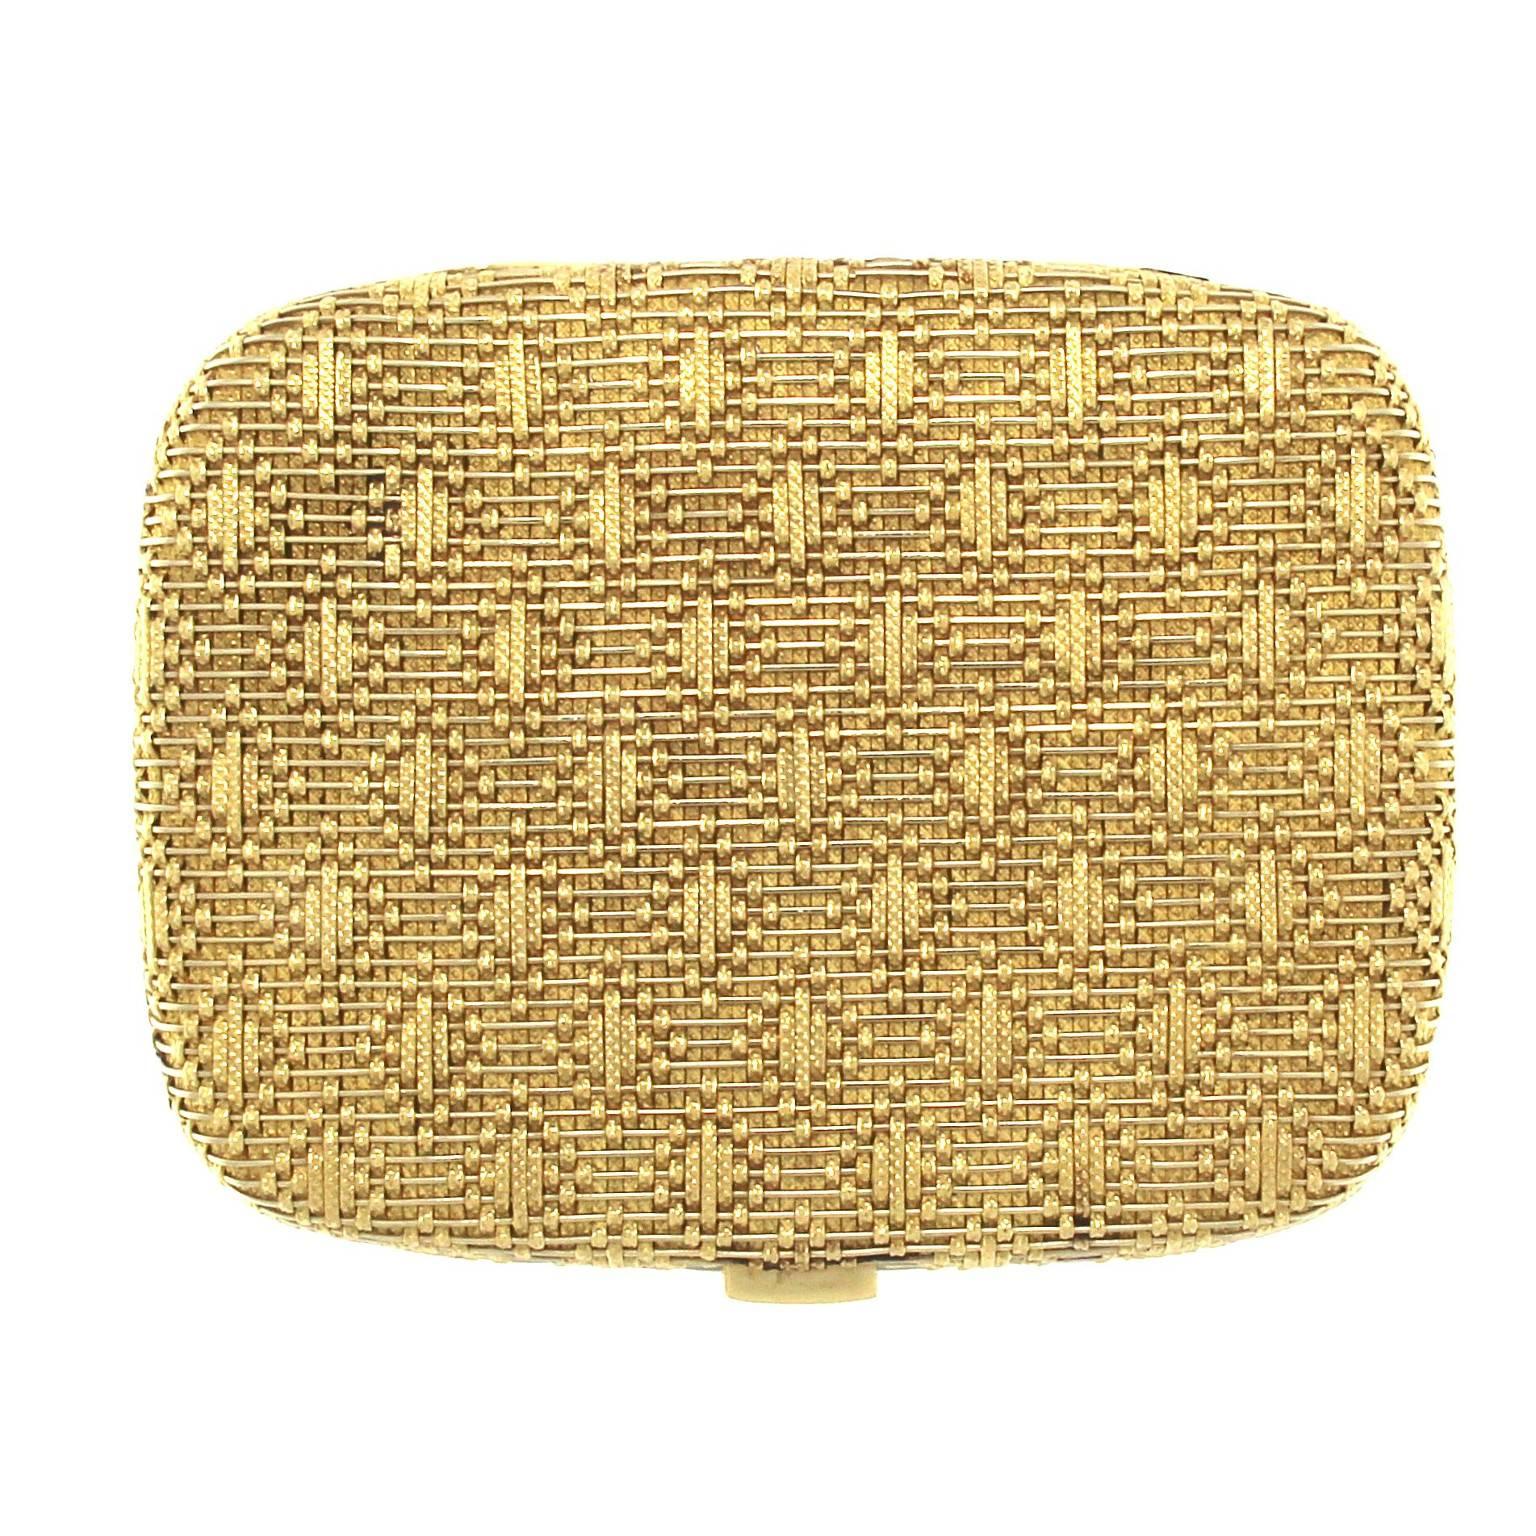 This 1950s authentic compact box powder and vanity mirror underneath was crafted in solid 18K yellow gold. 
The compact box has been embellished by skilled hands with a fabric effect finishing, really impossible to recreate nowadays. 
This authentic